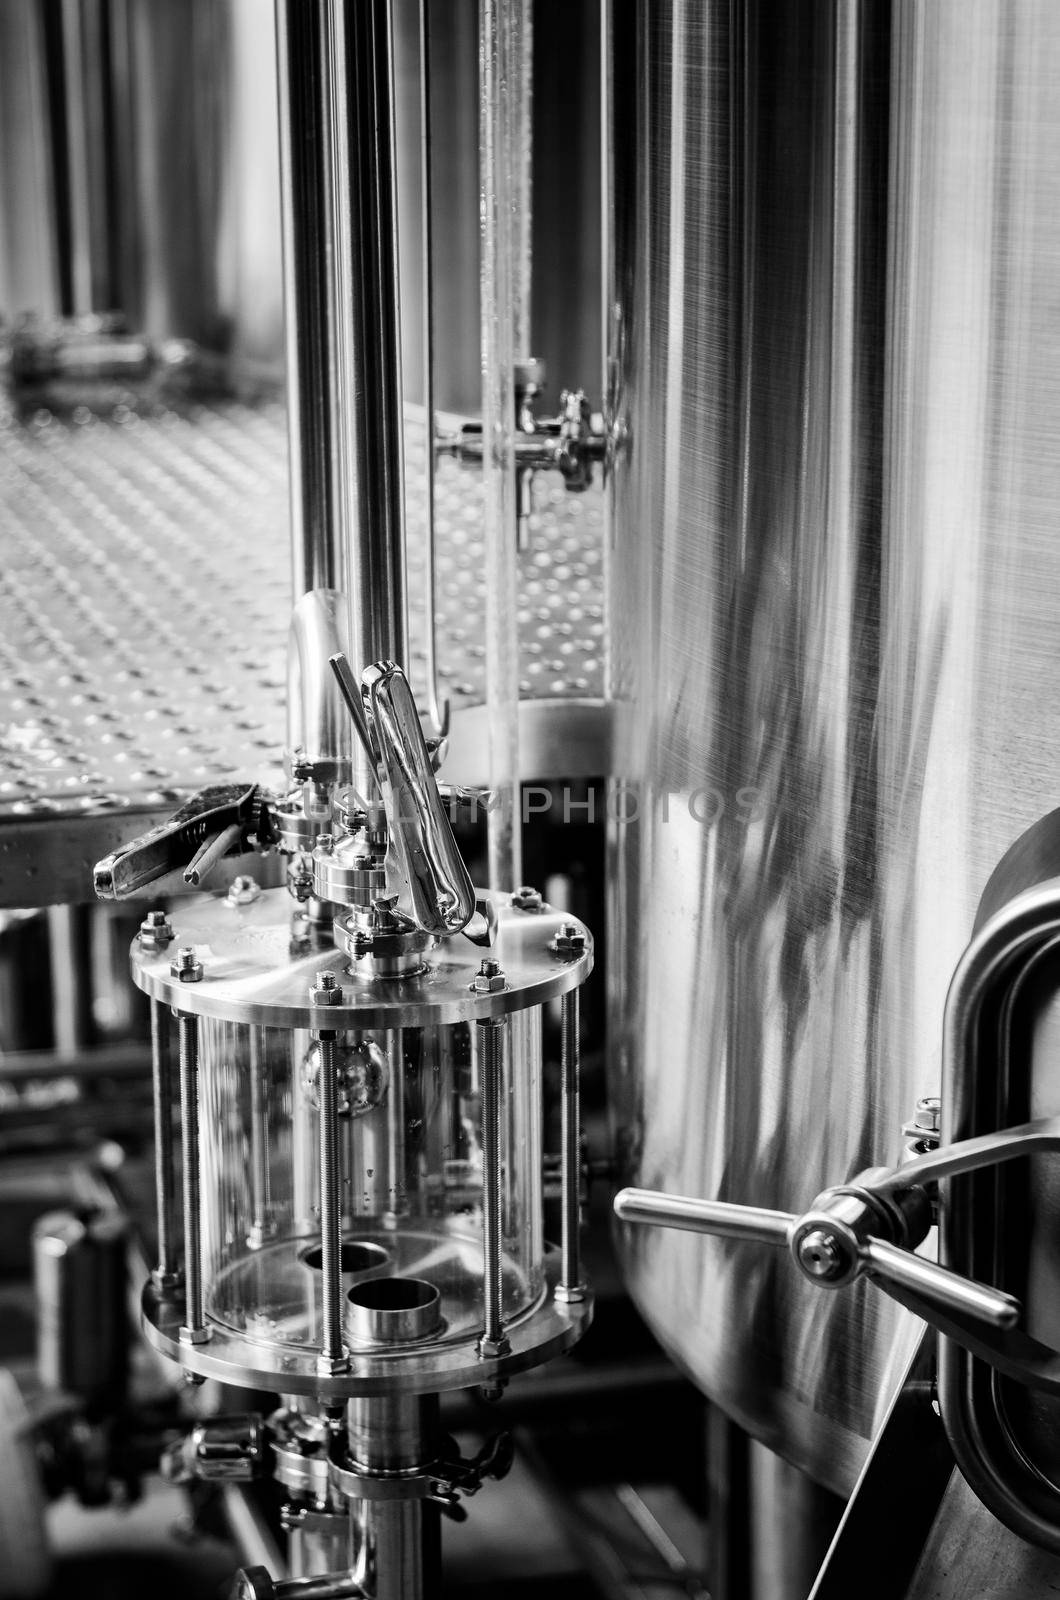 industrial beer brewing equipment detail in brewery interior by jackmalipan